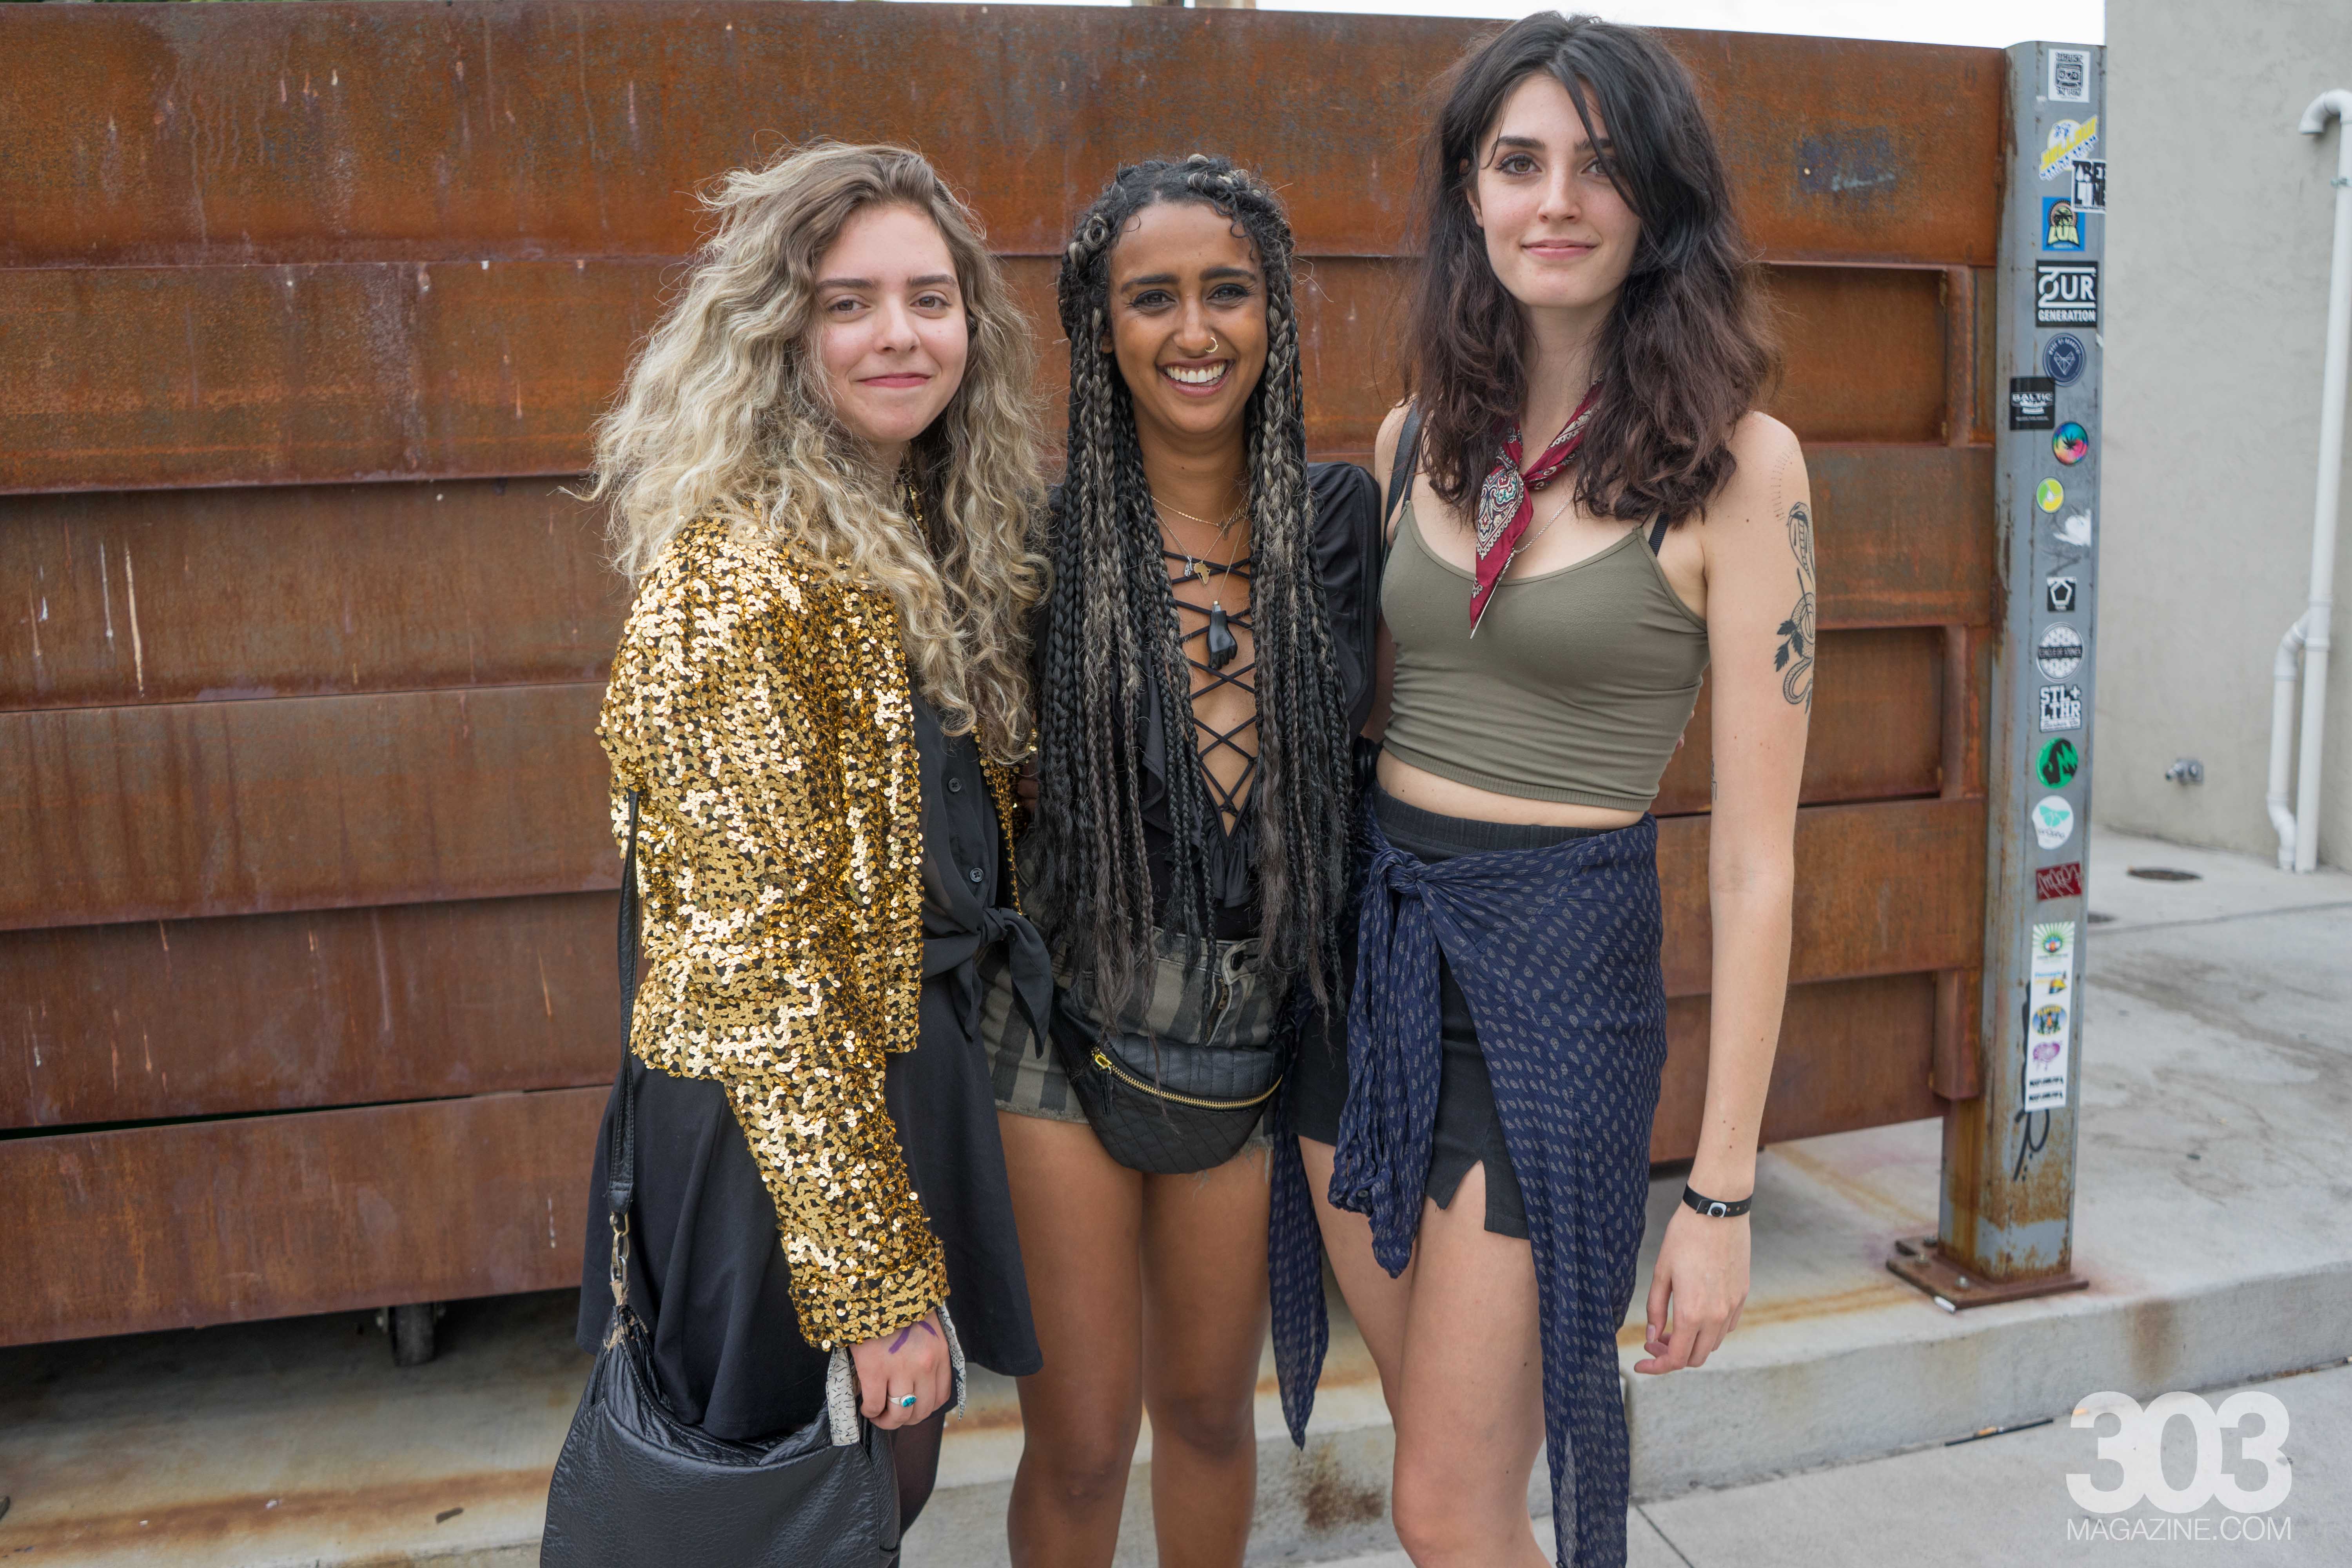 Demi of the Velveteers, Jerusalem and Lulu of Bandits outside of Illegal Pete's